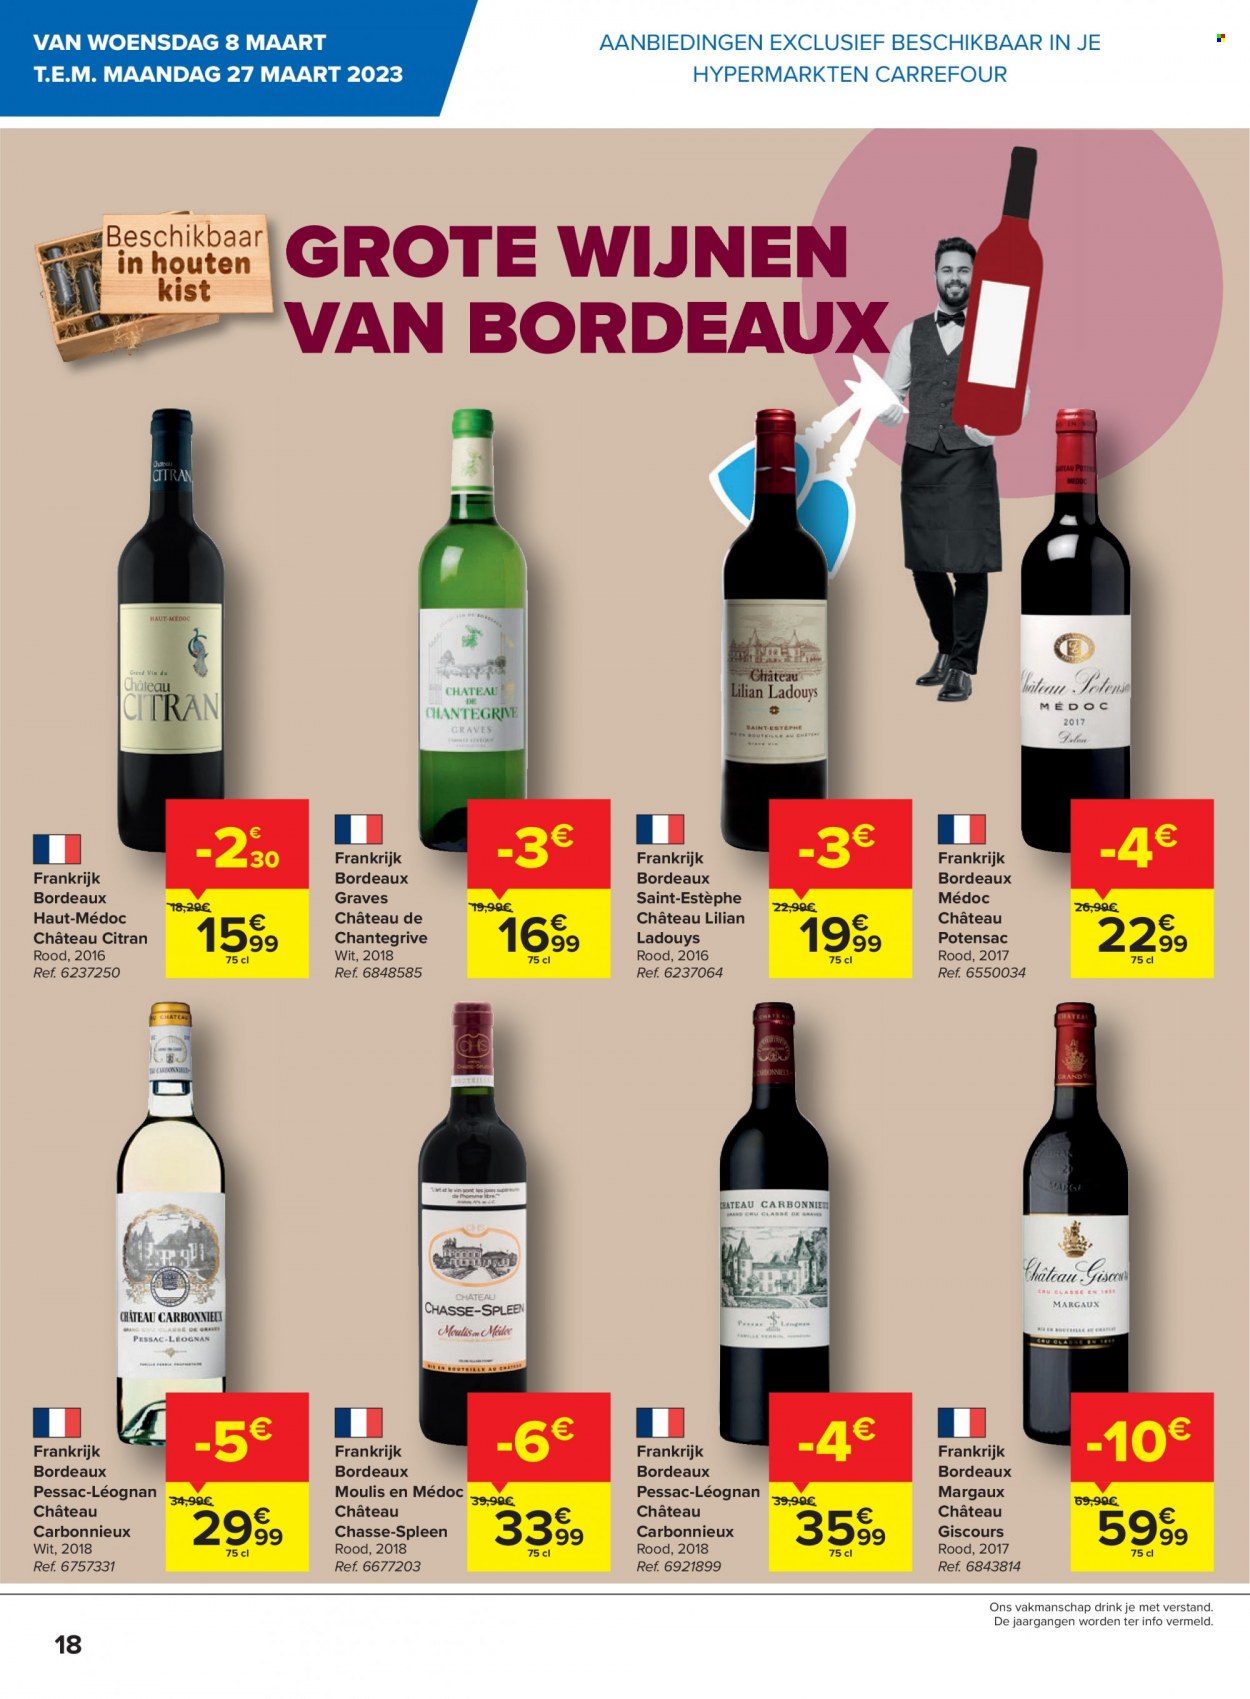 Catalogue Carrefour hypermarkt - 8.3.2023 - 27.3.2023. Page 2.